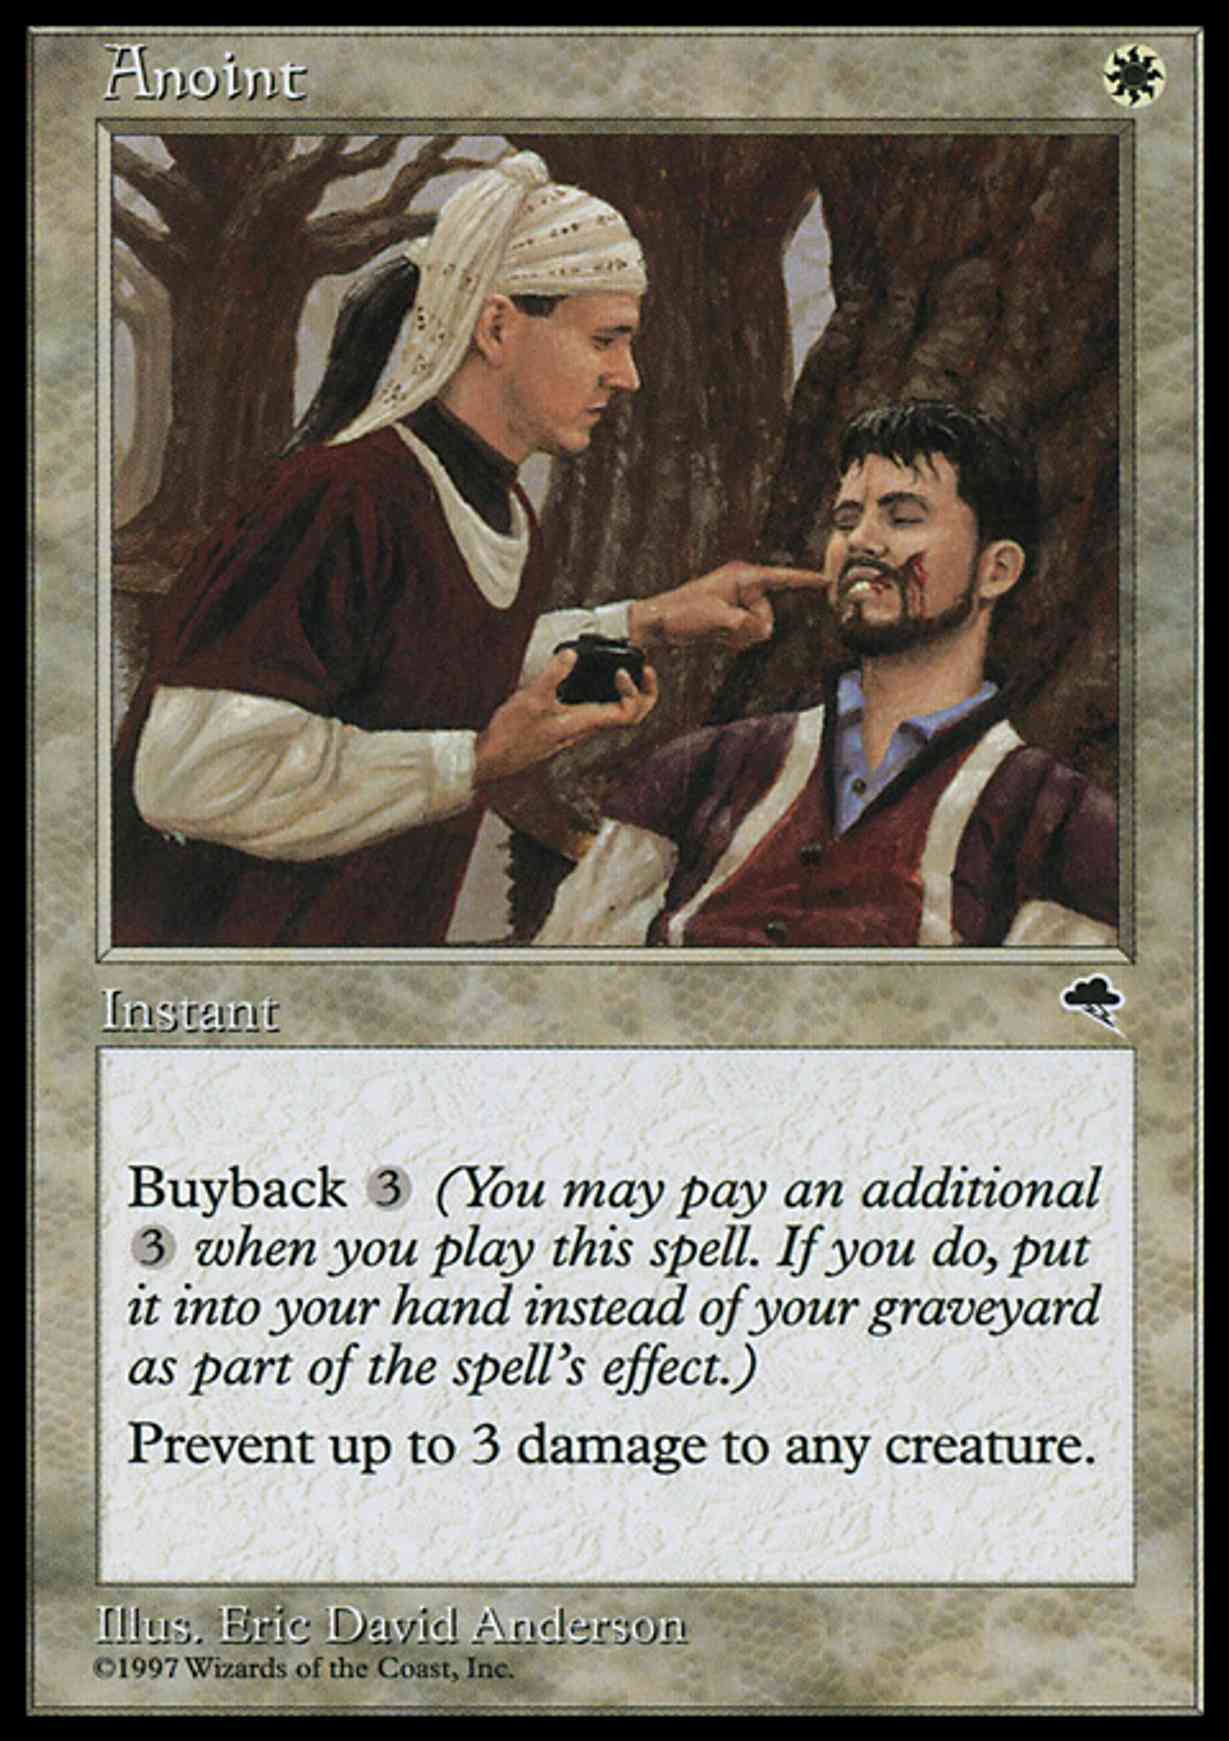 Anoint magic card front